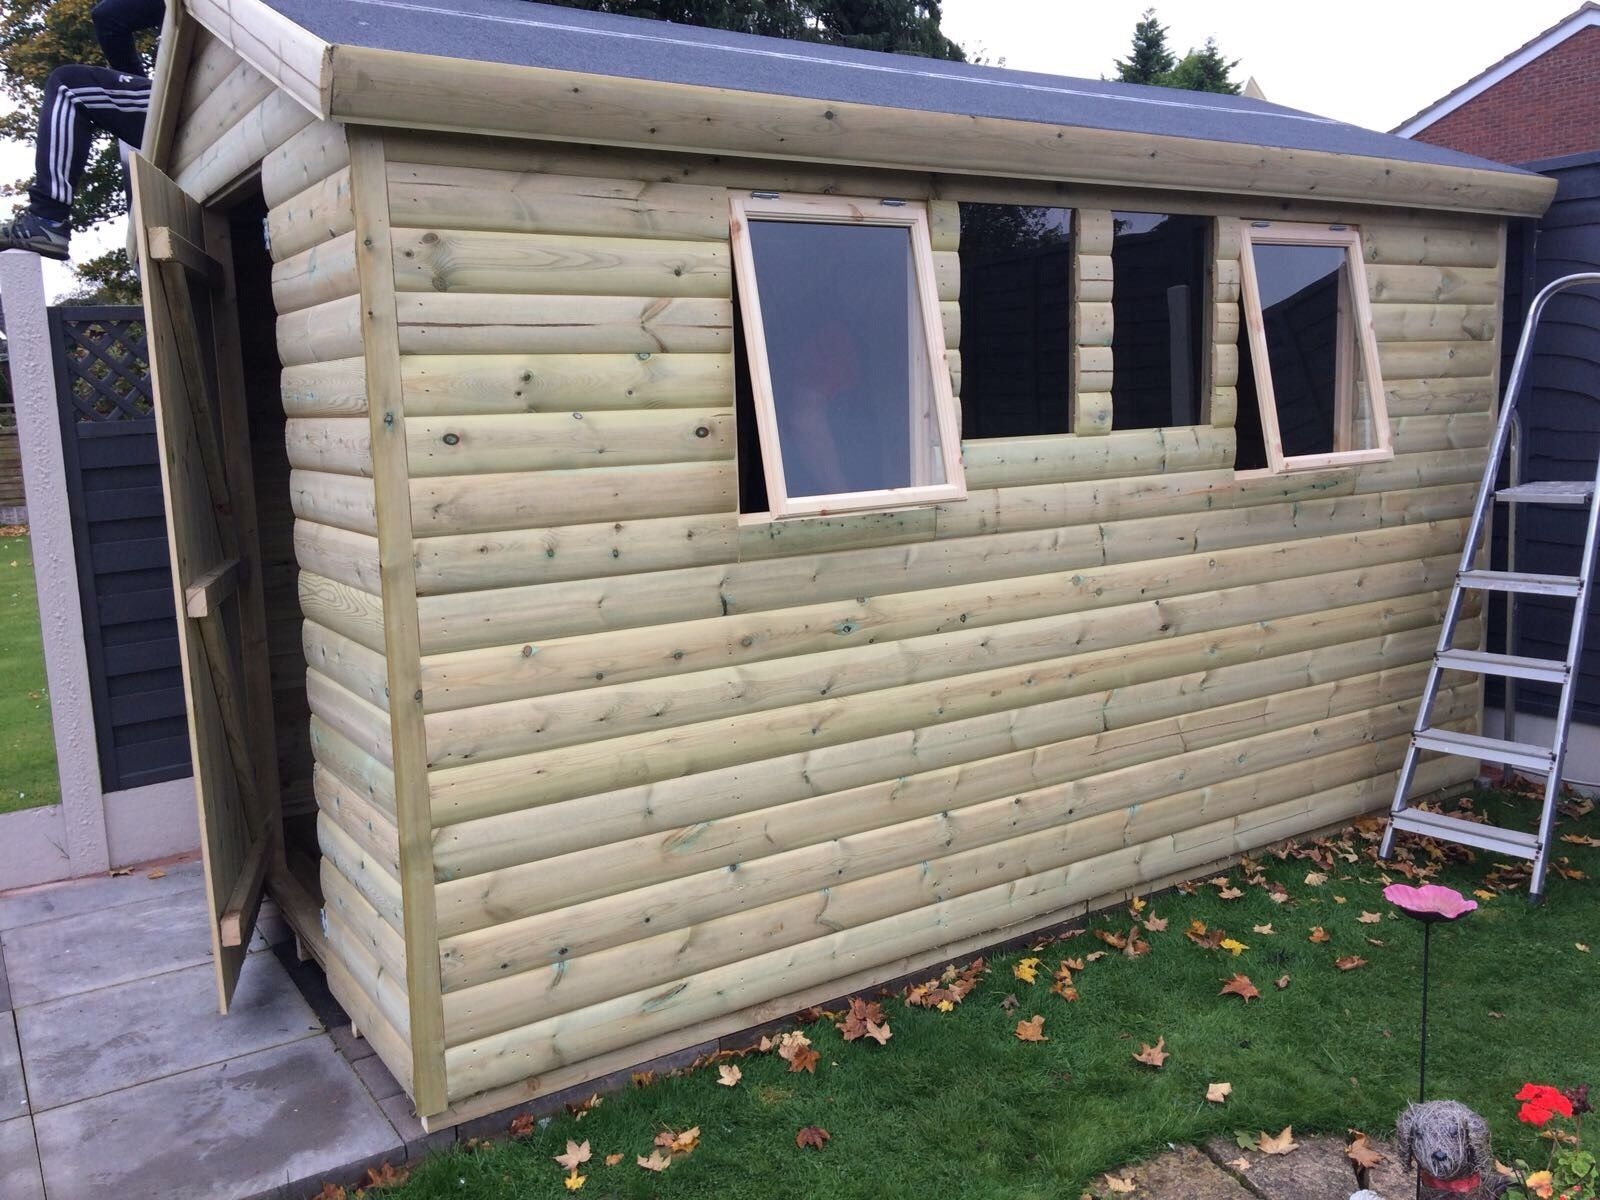 12 x 8ft Wooden Garden Tanalised Summerhouse Log Lap With 2′ Canopy Tapered Sides